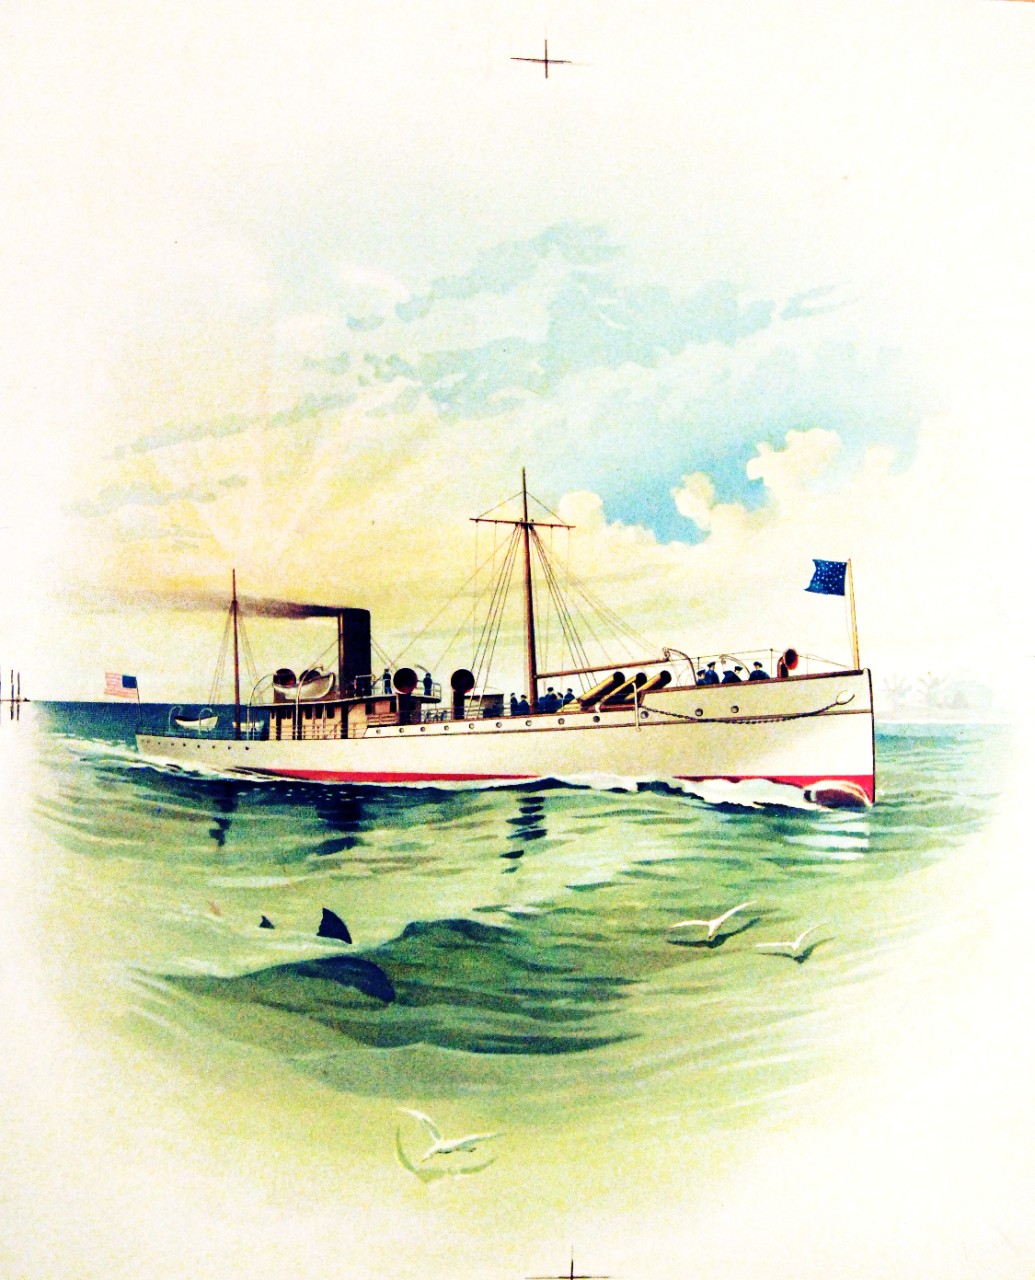 Lot 4812-9:   USS Vesuvius, 1897-98.    U.S. Navy dynamite cruiser, USS Vesuvius, starboard view.  Note, dolphin and seagulls.   Reproduction of a painting by Koerner & Hayes, circa 1897-98.  Courtesy of the Library of Congress.   (2015/7/24).